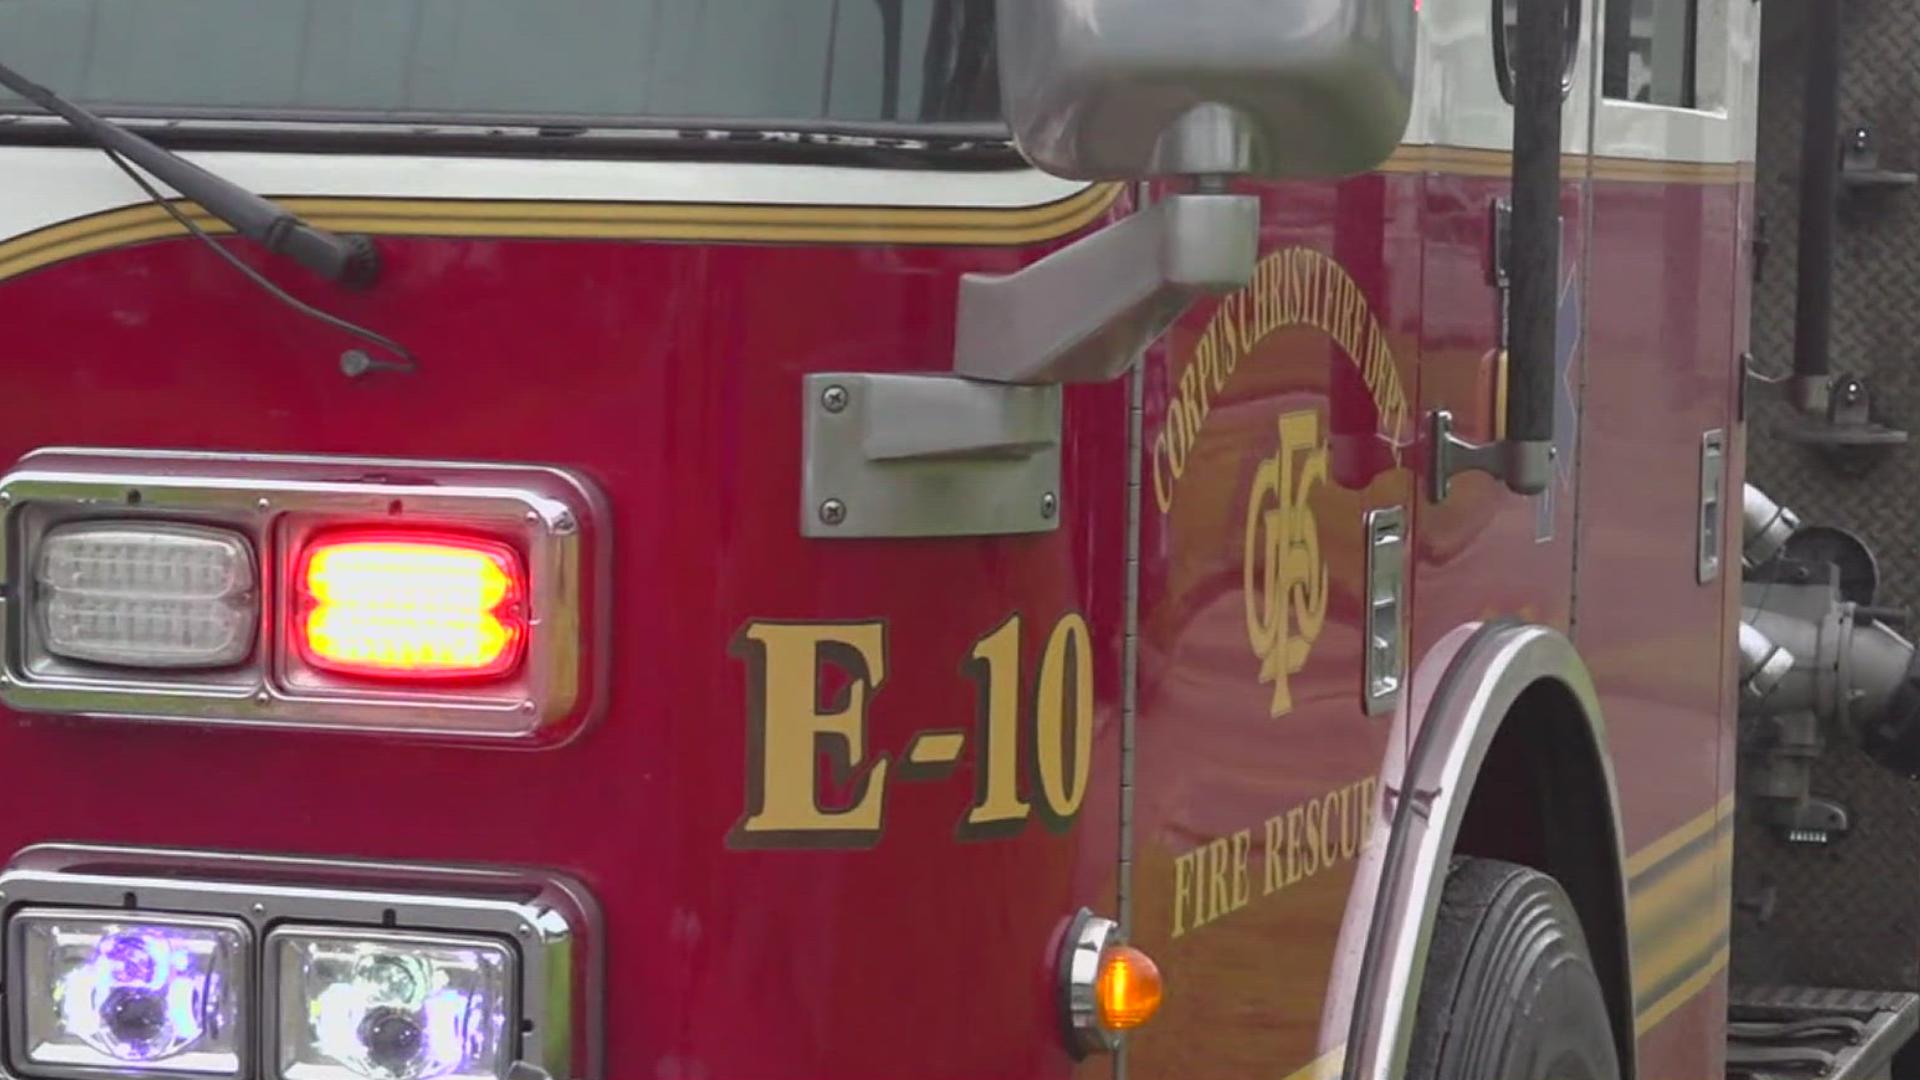 The Corpus Christi Fire Department is considering more locations to build new stations.